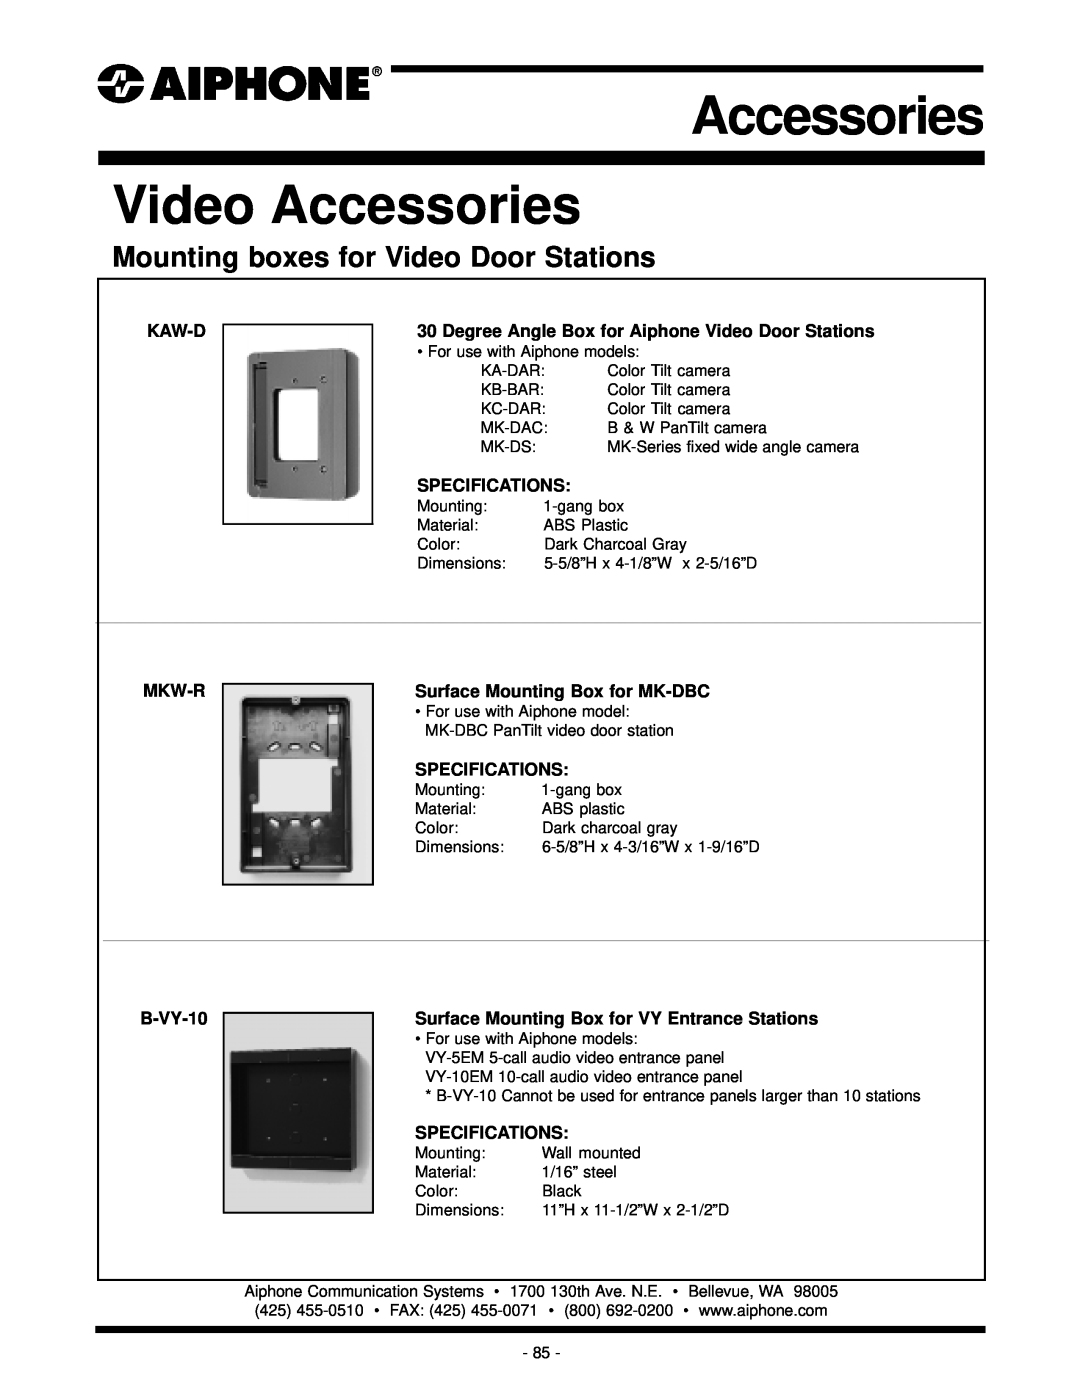 Aiphone KA-DGR Mounting boxes for Video Door Stations, Kaw-D, Specifications, Mkw-R, Surface Mounting Box for MK-DBC 